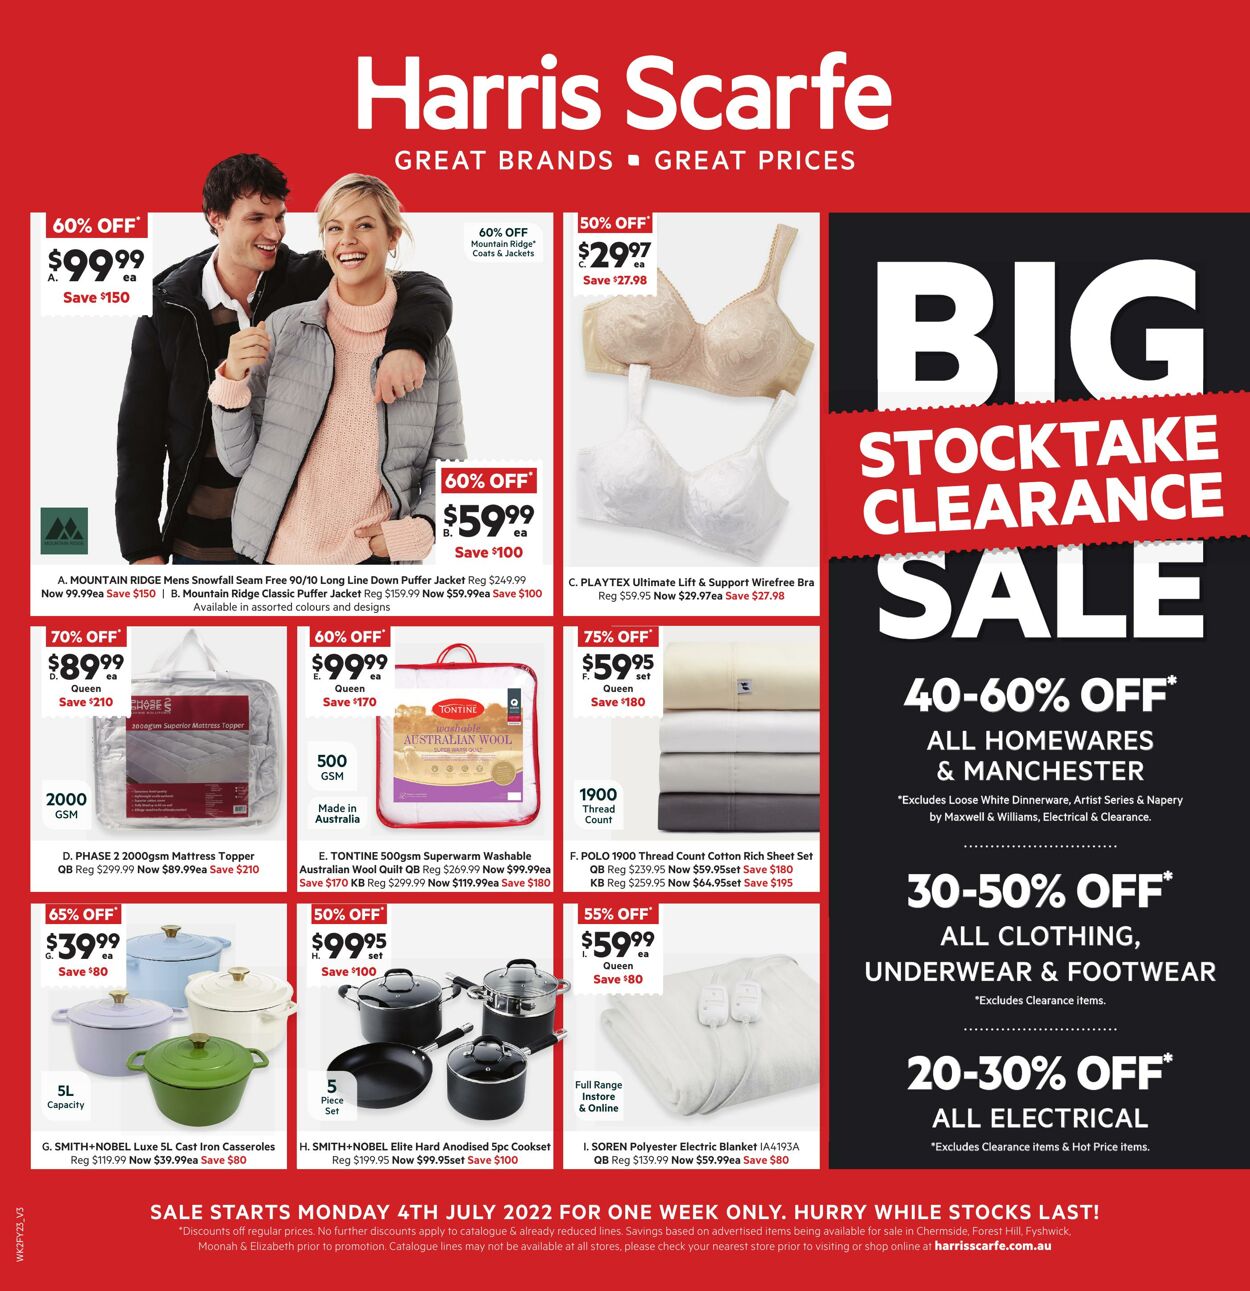 Harris Scarfe Promotional catalogues